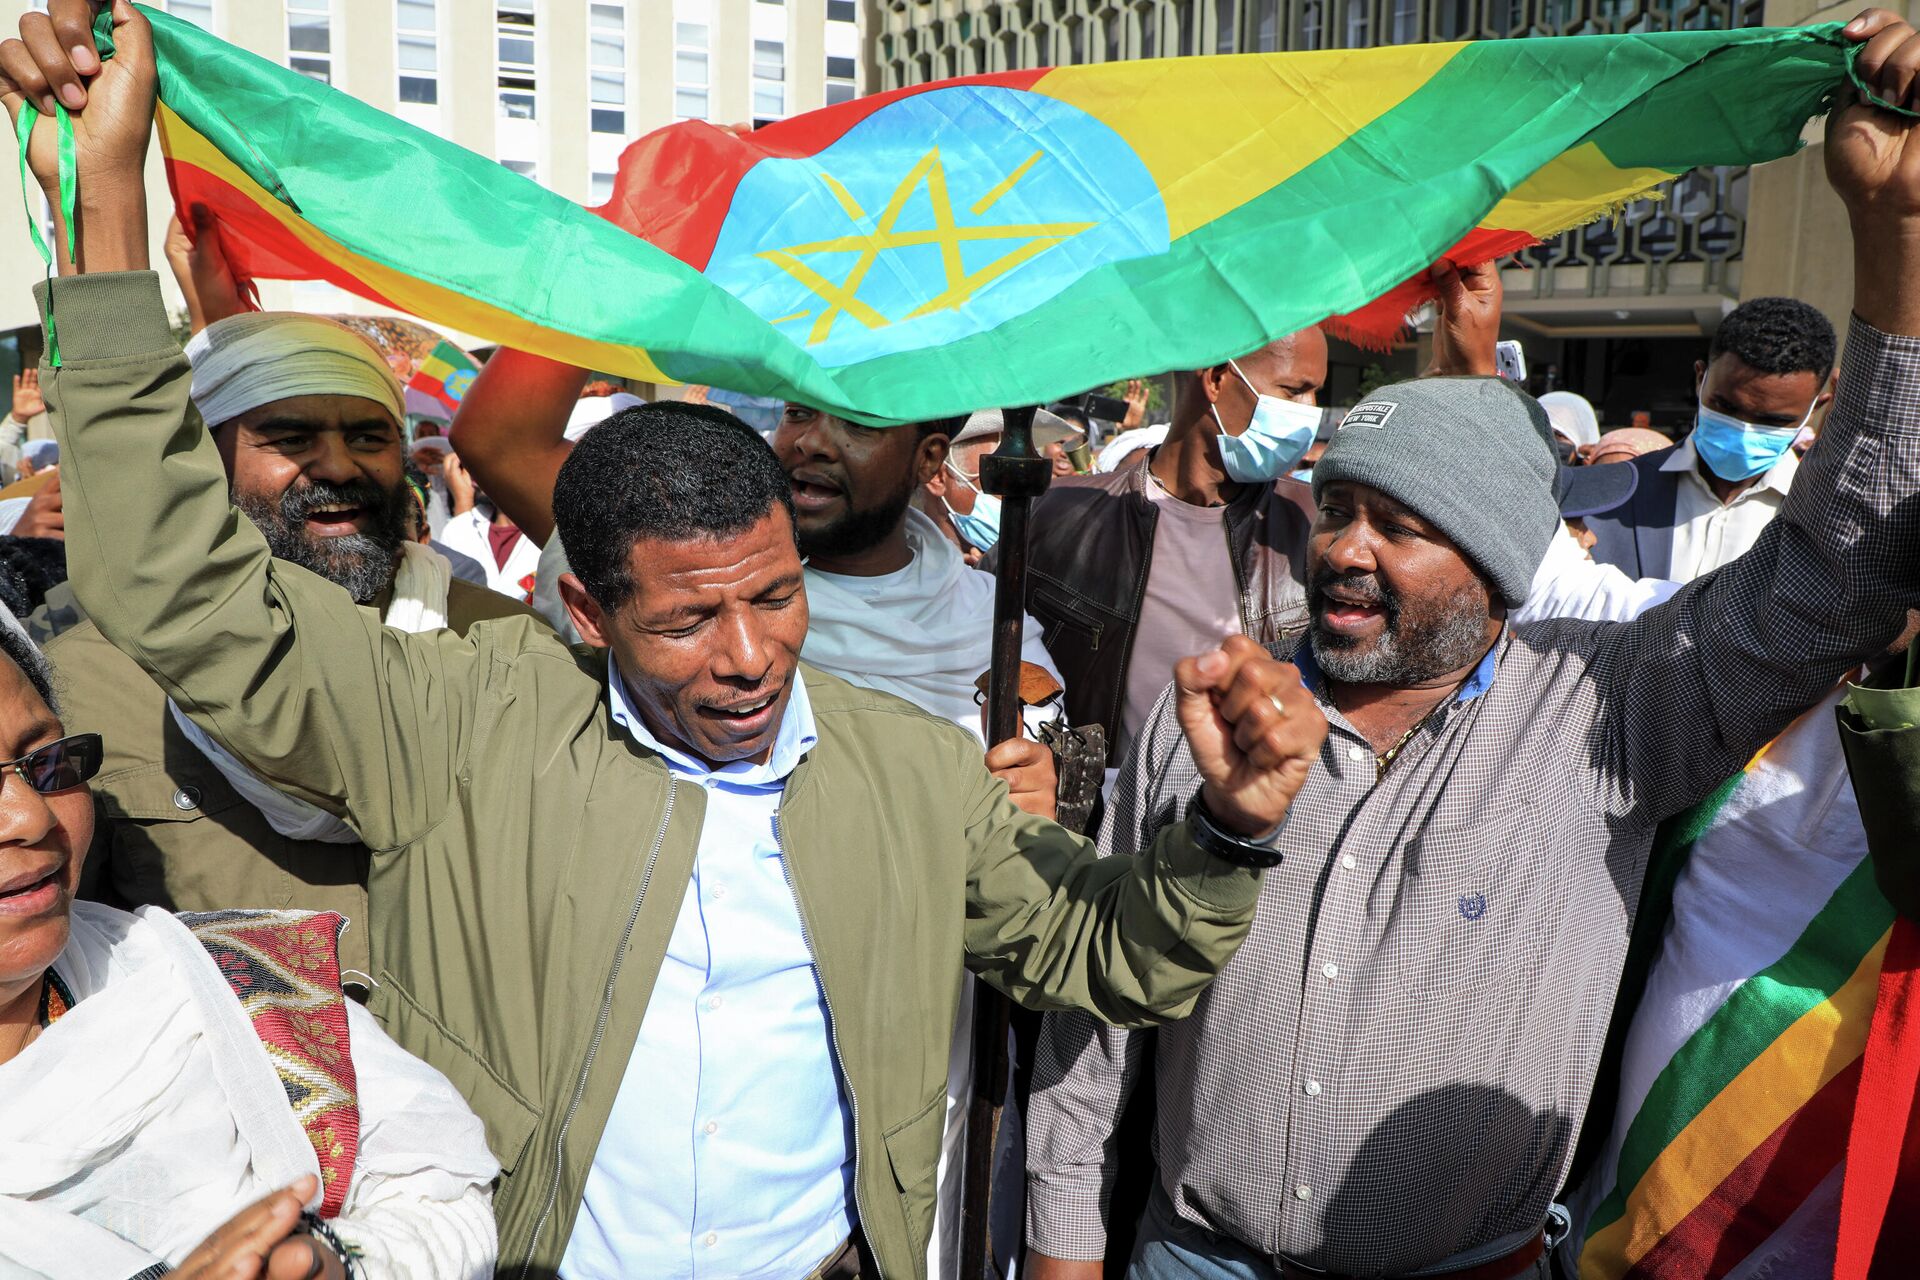 Ethiopian distance-running great Haile Gebrselassie, left, attends an event in support the country's military forces, in front of the city hall in Addis Ababa, Ethiopia Saturday, Nov. 27, 2021. Ethiopian artists and performers gathered at the event before they were expected to travel out of the capital to perform for military forces in the field of the country’s yearlong war against Tigray forces. - Sputnik International, 1920, 10.12.2021